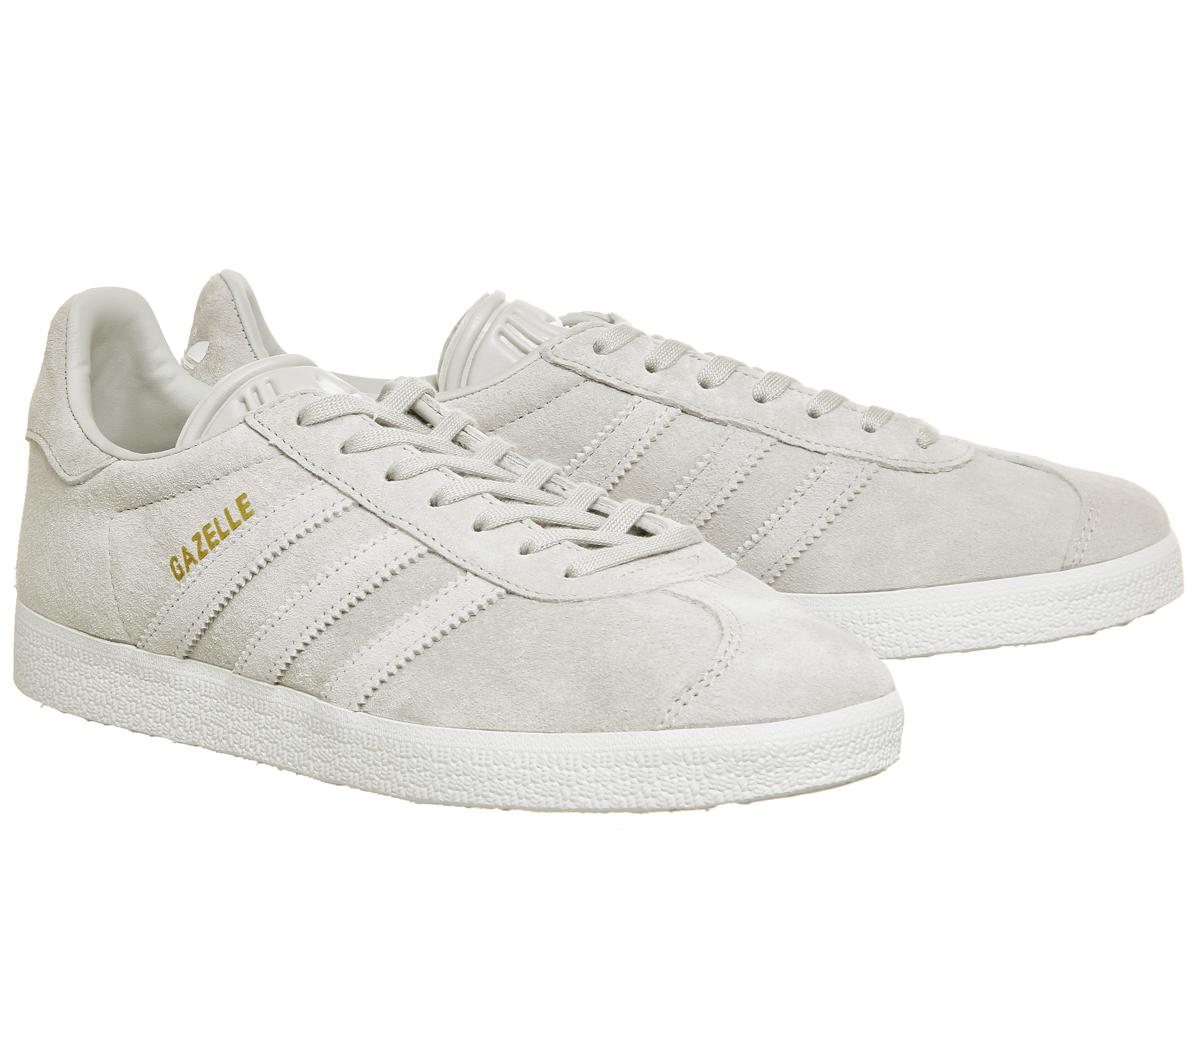 adidas gazelle shoes squeaky